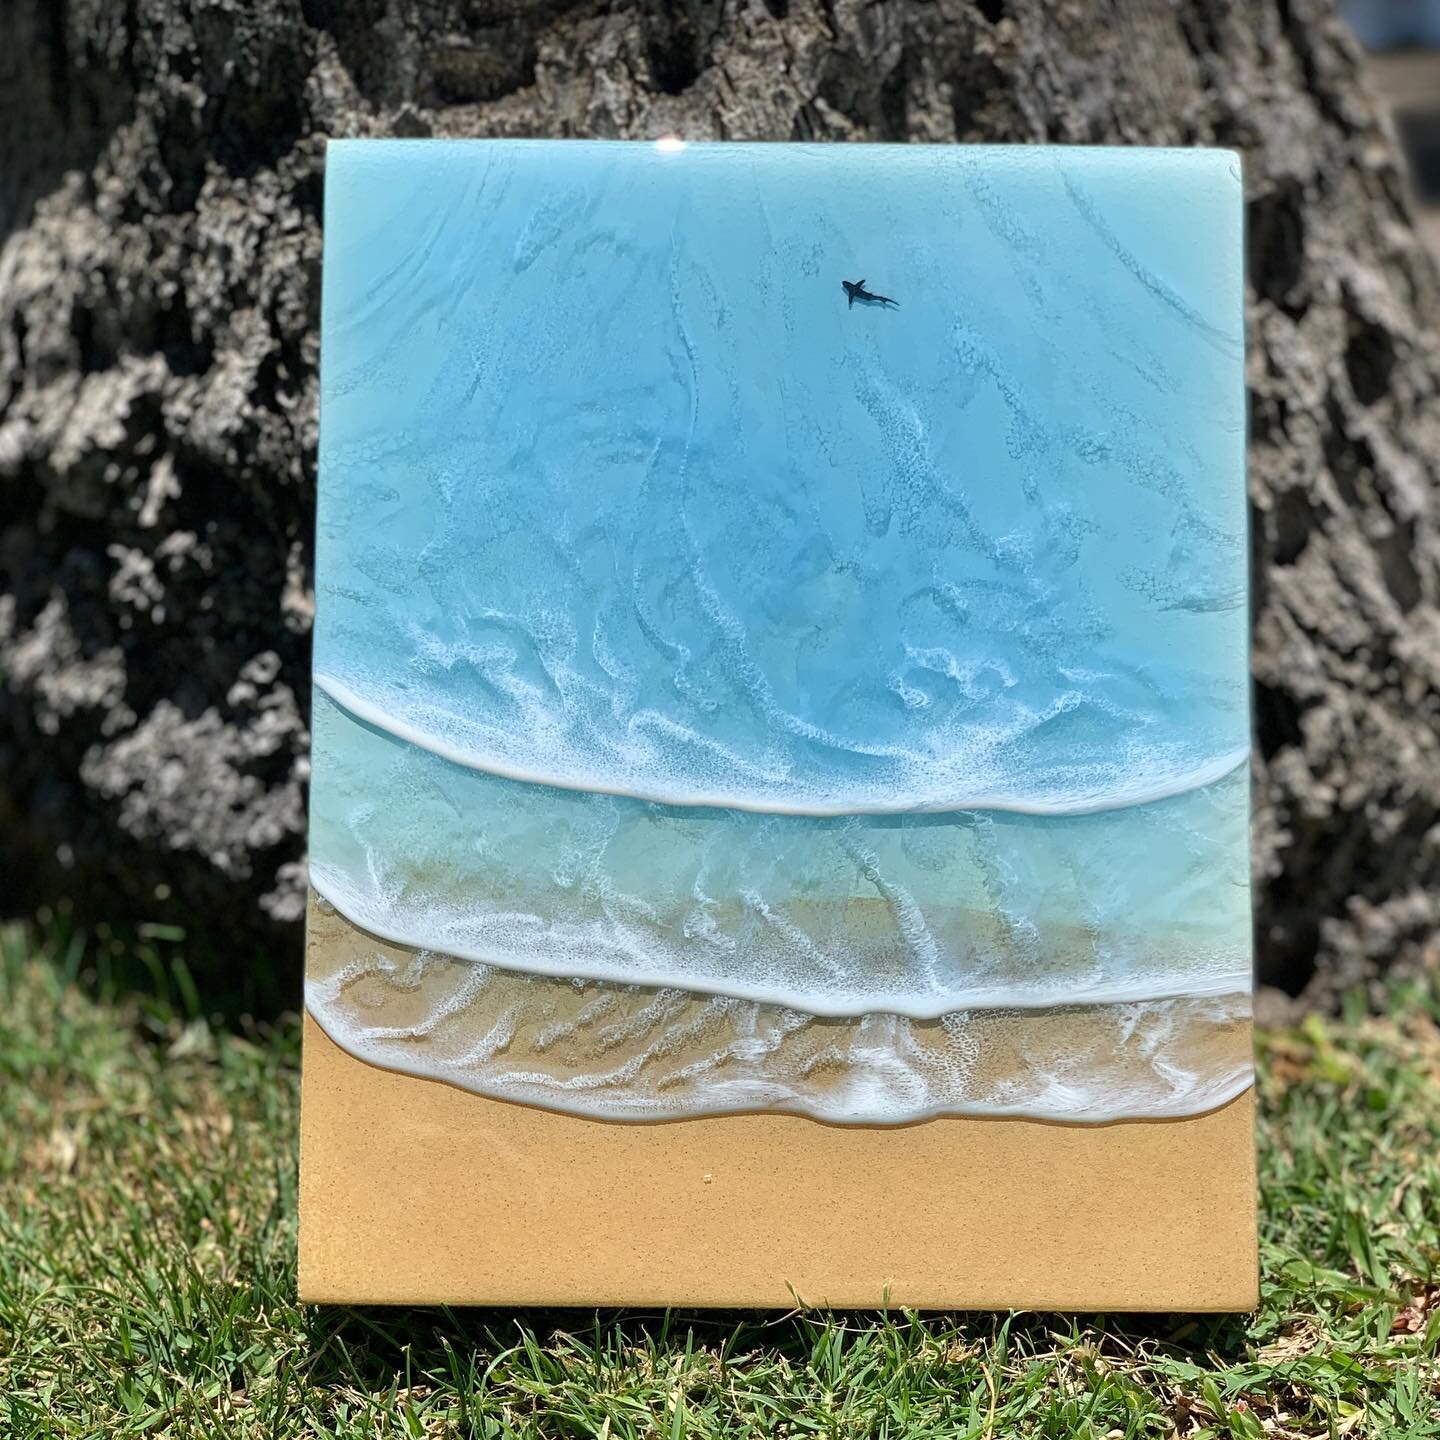 Swipe for the angles. These 8x10&rsquo;s are also made on a hardwood artist panel and perfect to throw in a suitcase or easy to ship without worrying about them being damaged. Perfect to send as a gift or take home as a souvenir. #waikiki #oahu #hawa